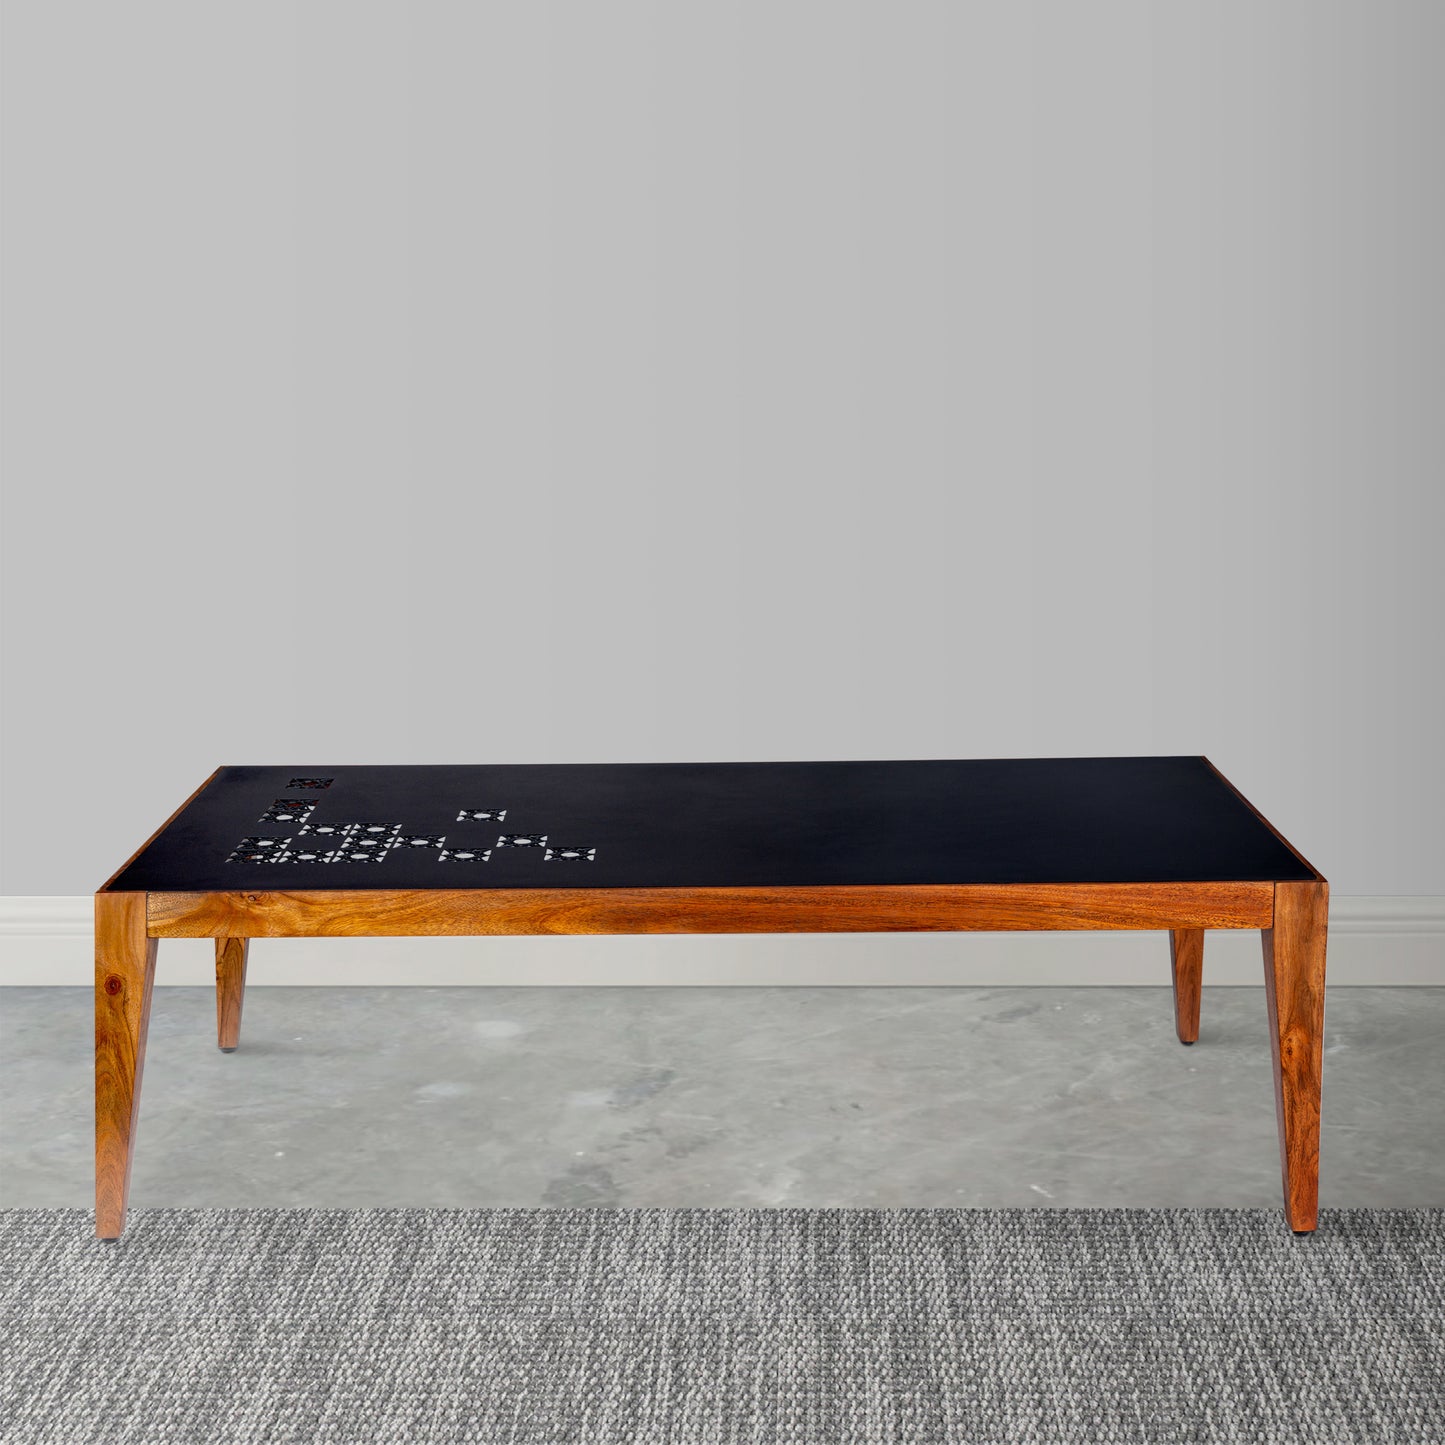 Metal Top Coffee Table with Laser Cut Design, Black and Brown - Alba 47 Inch Rectangular